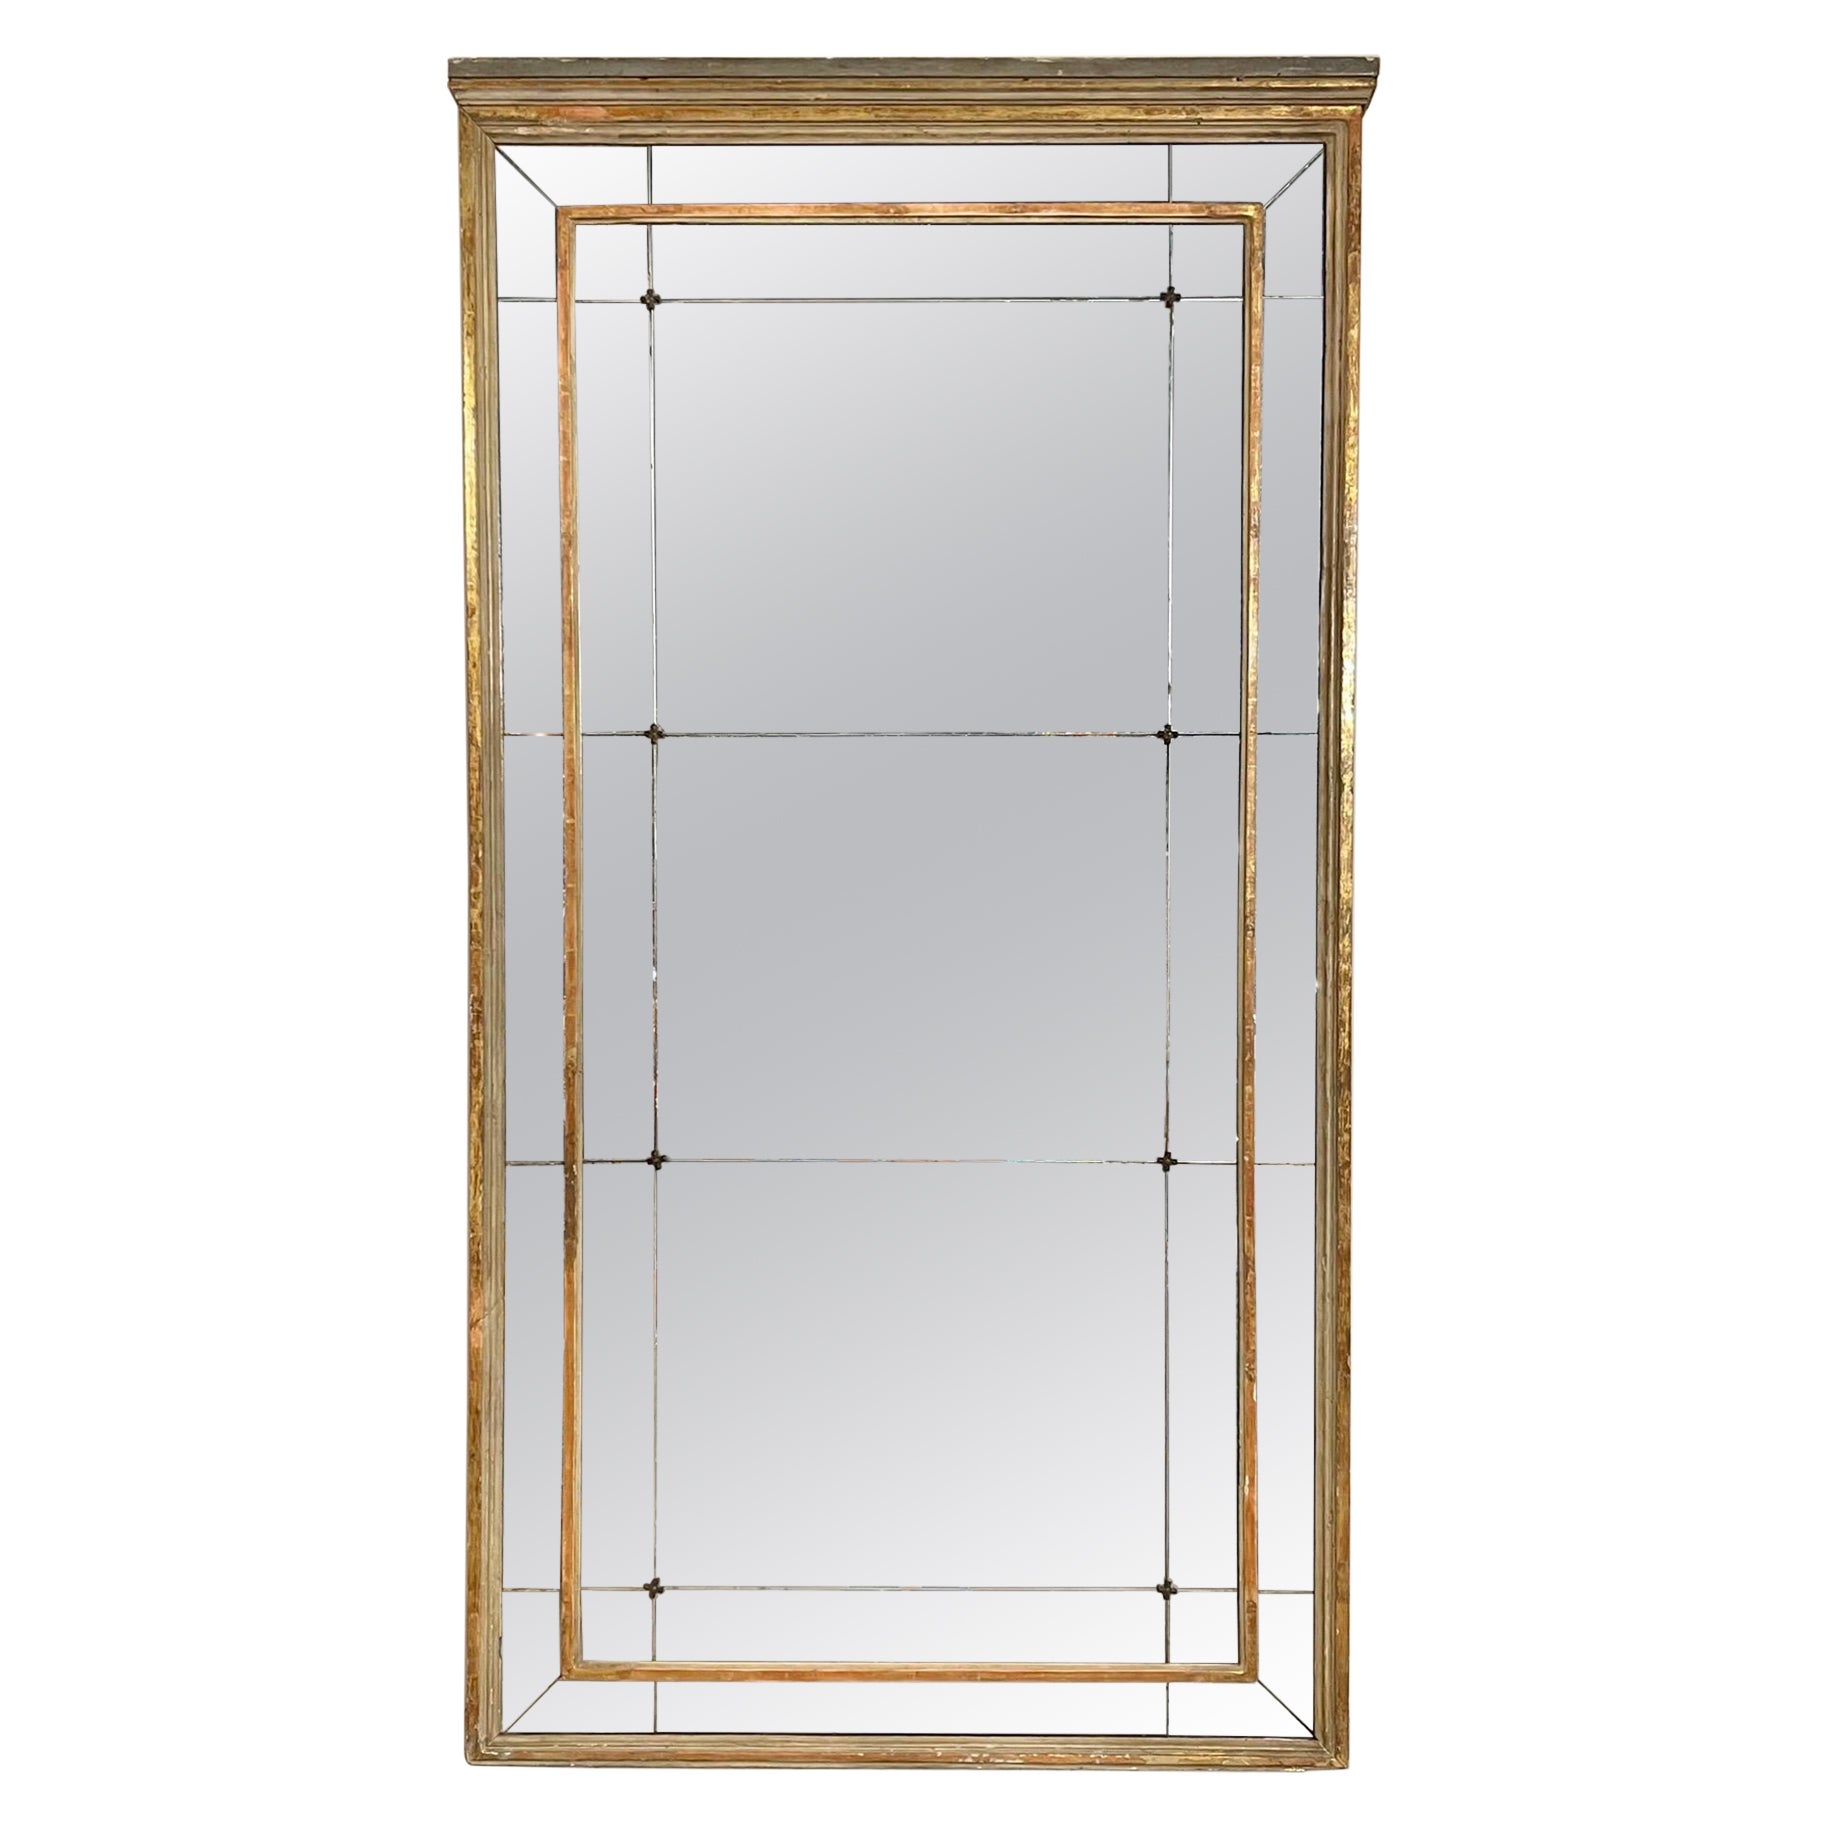 19th Century French Directoire Period Mirror with Divided Mercury Glass